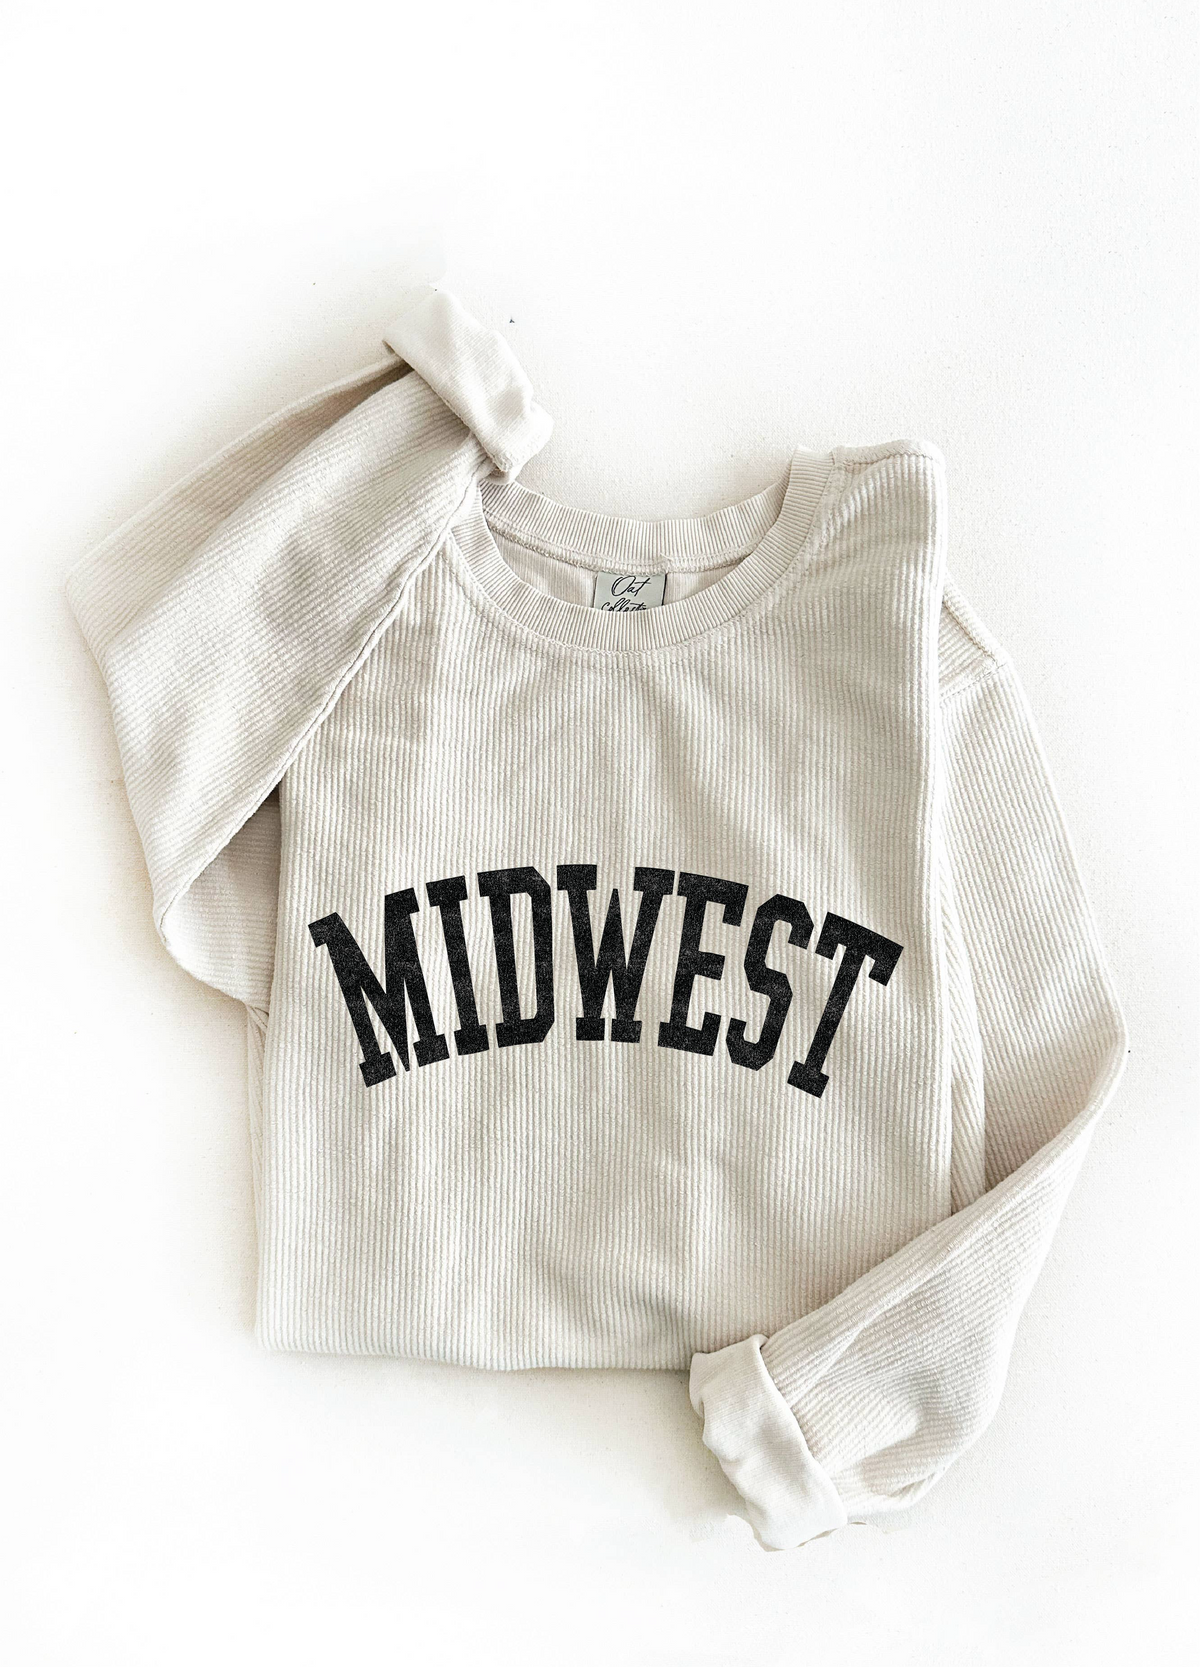 MIDWEST Thermal Vintage Pullover: Dusty Vanilla